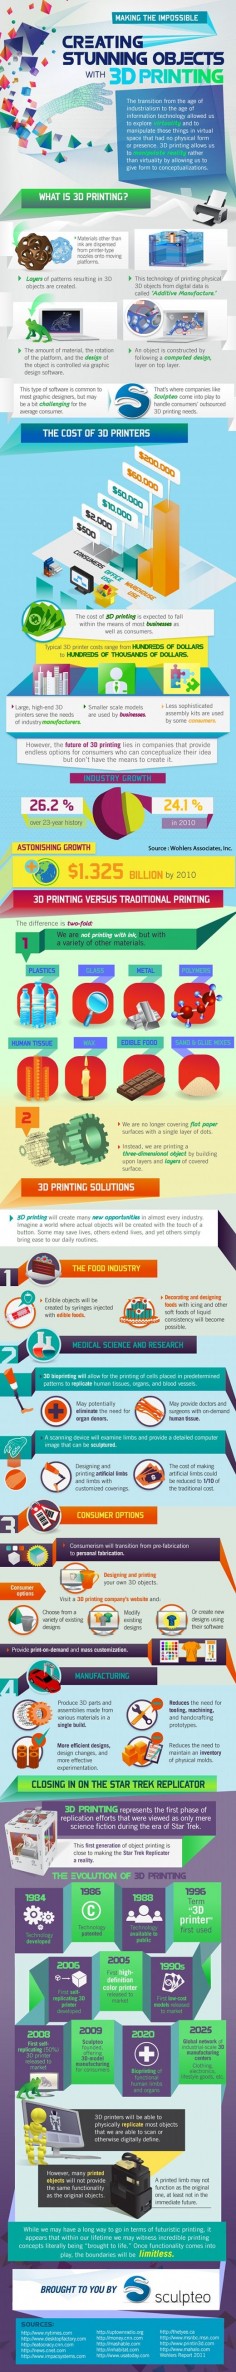 Infographic on 3D printing